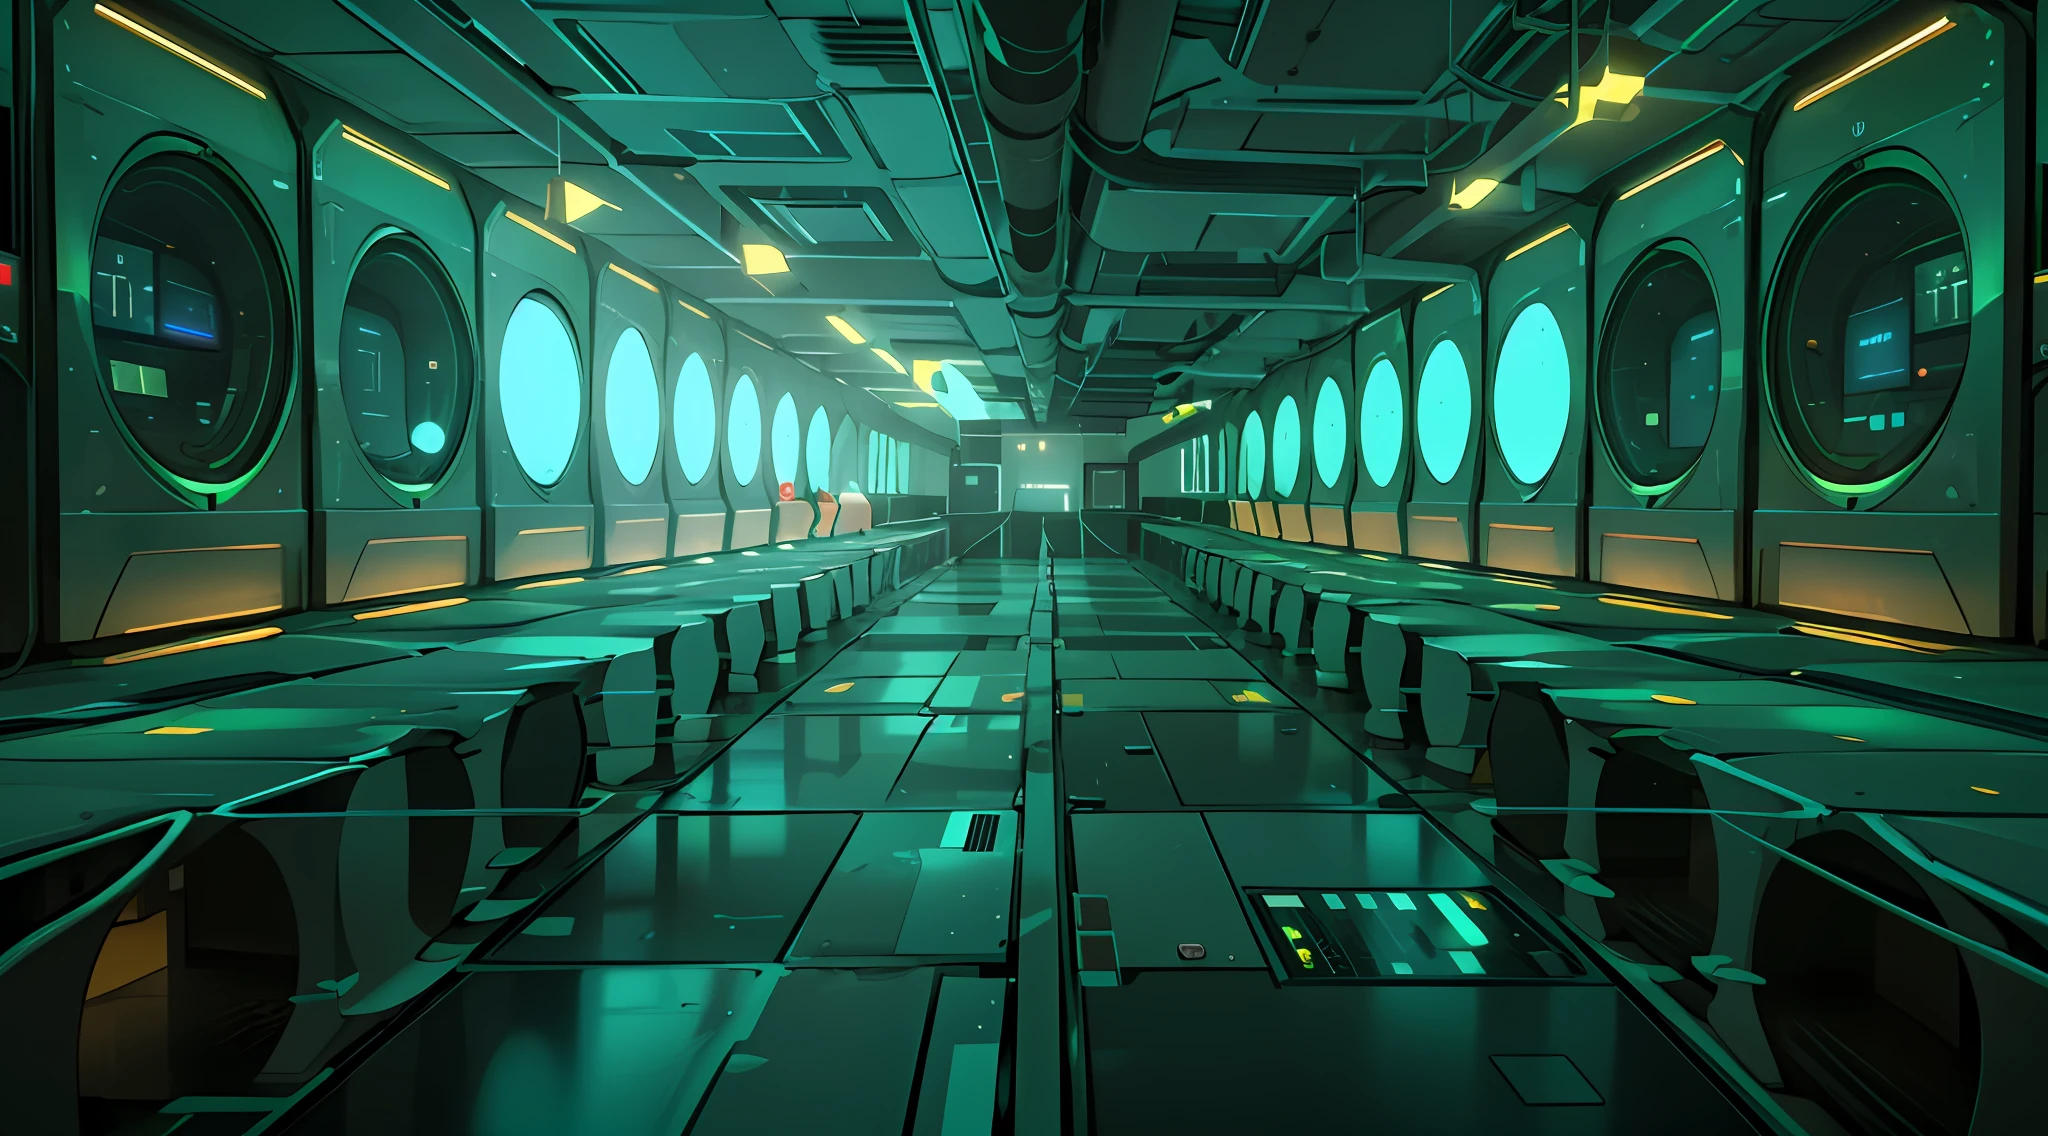 A dimly lit corridor，There are rows of data and computer screens，background is data server room，Hacking mainframes，cyber space，in realistic data center，3840x2160，3840 x 2160，Spaceship corridor background，Network architecture，surreal cyberspace，in detailed data center  ，green colored theme